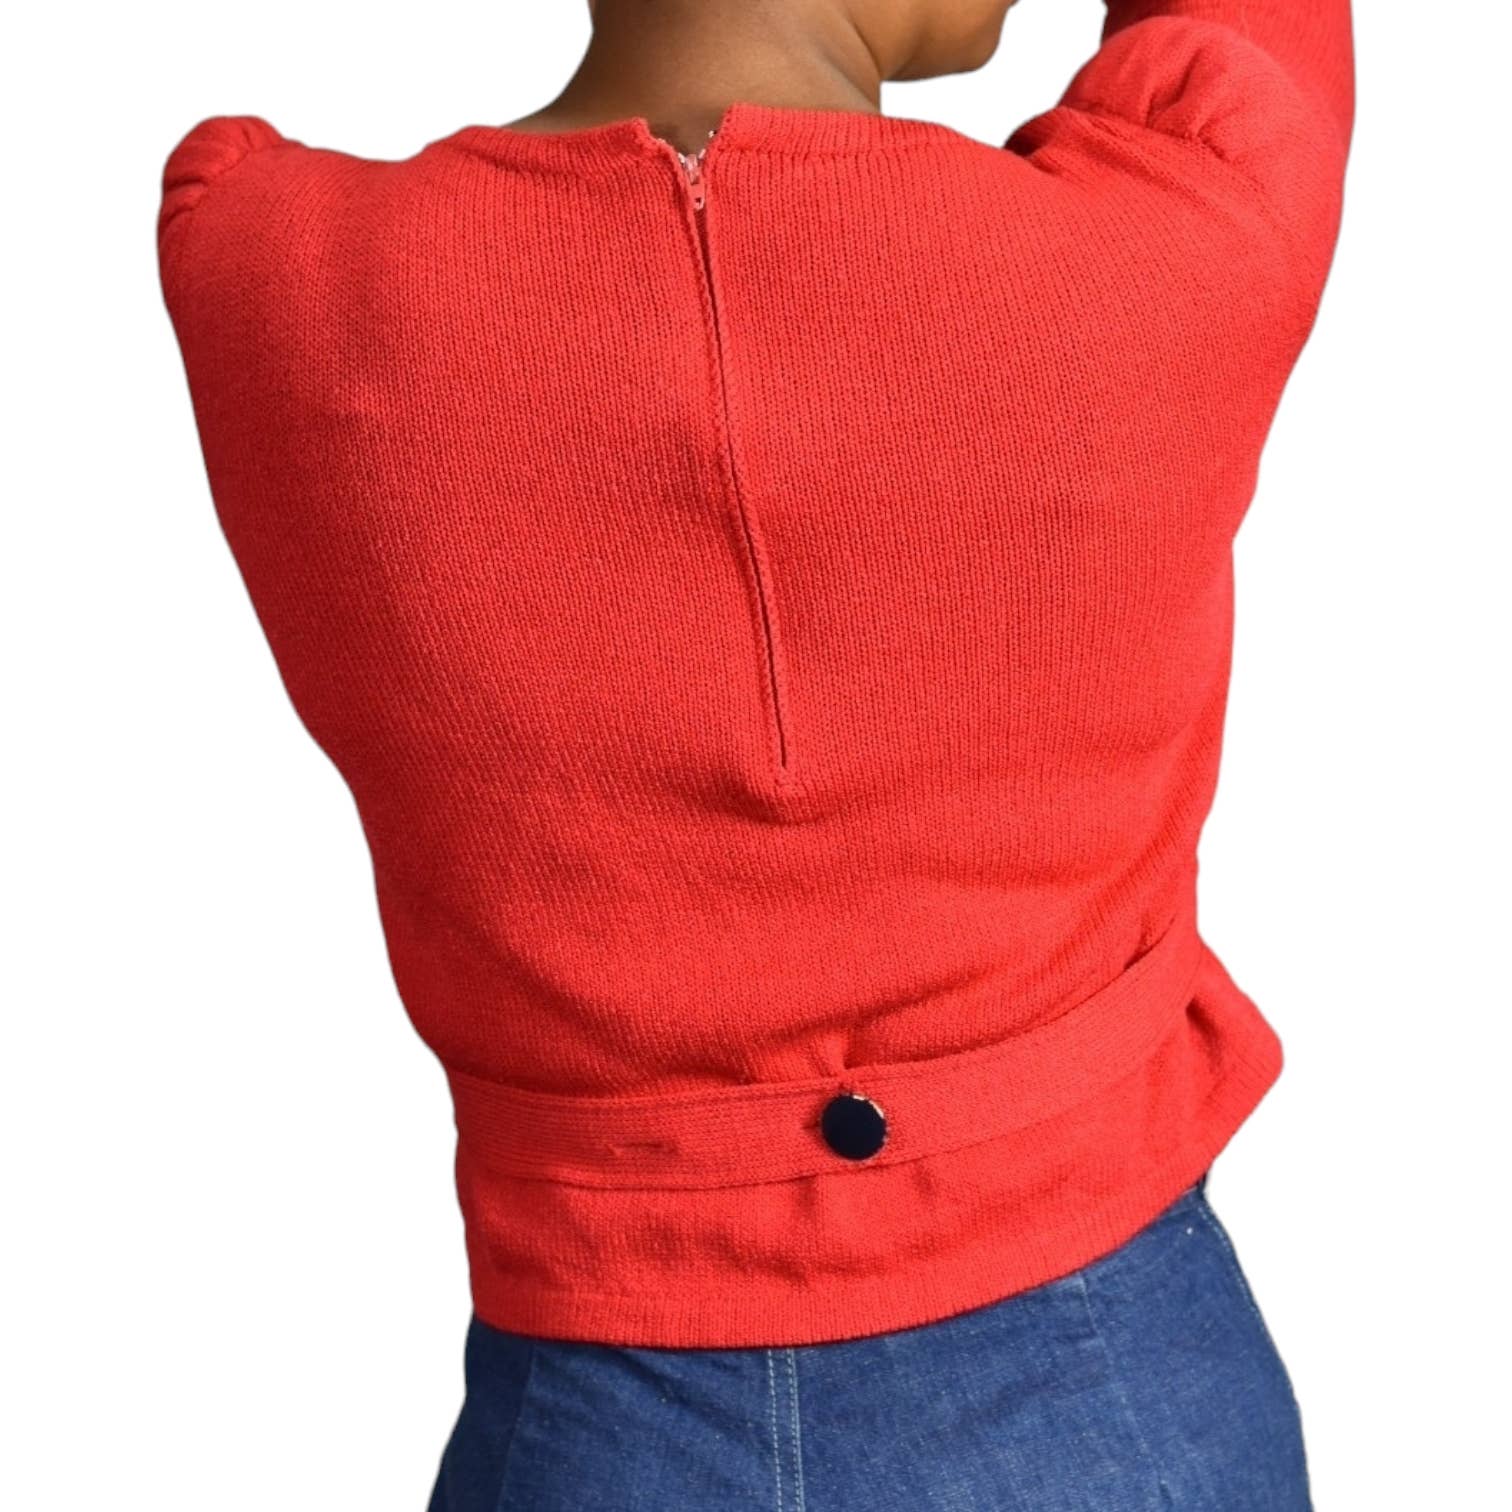 Vintage St John Top Red Sweater Santana Knit Shoulder Pads Puff Sleeve Marie Gray Size 4